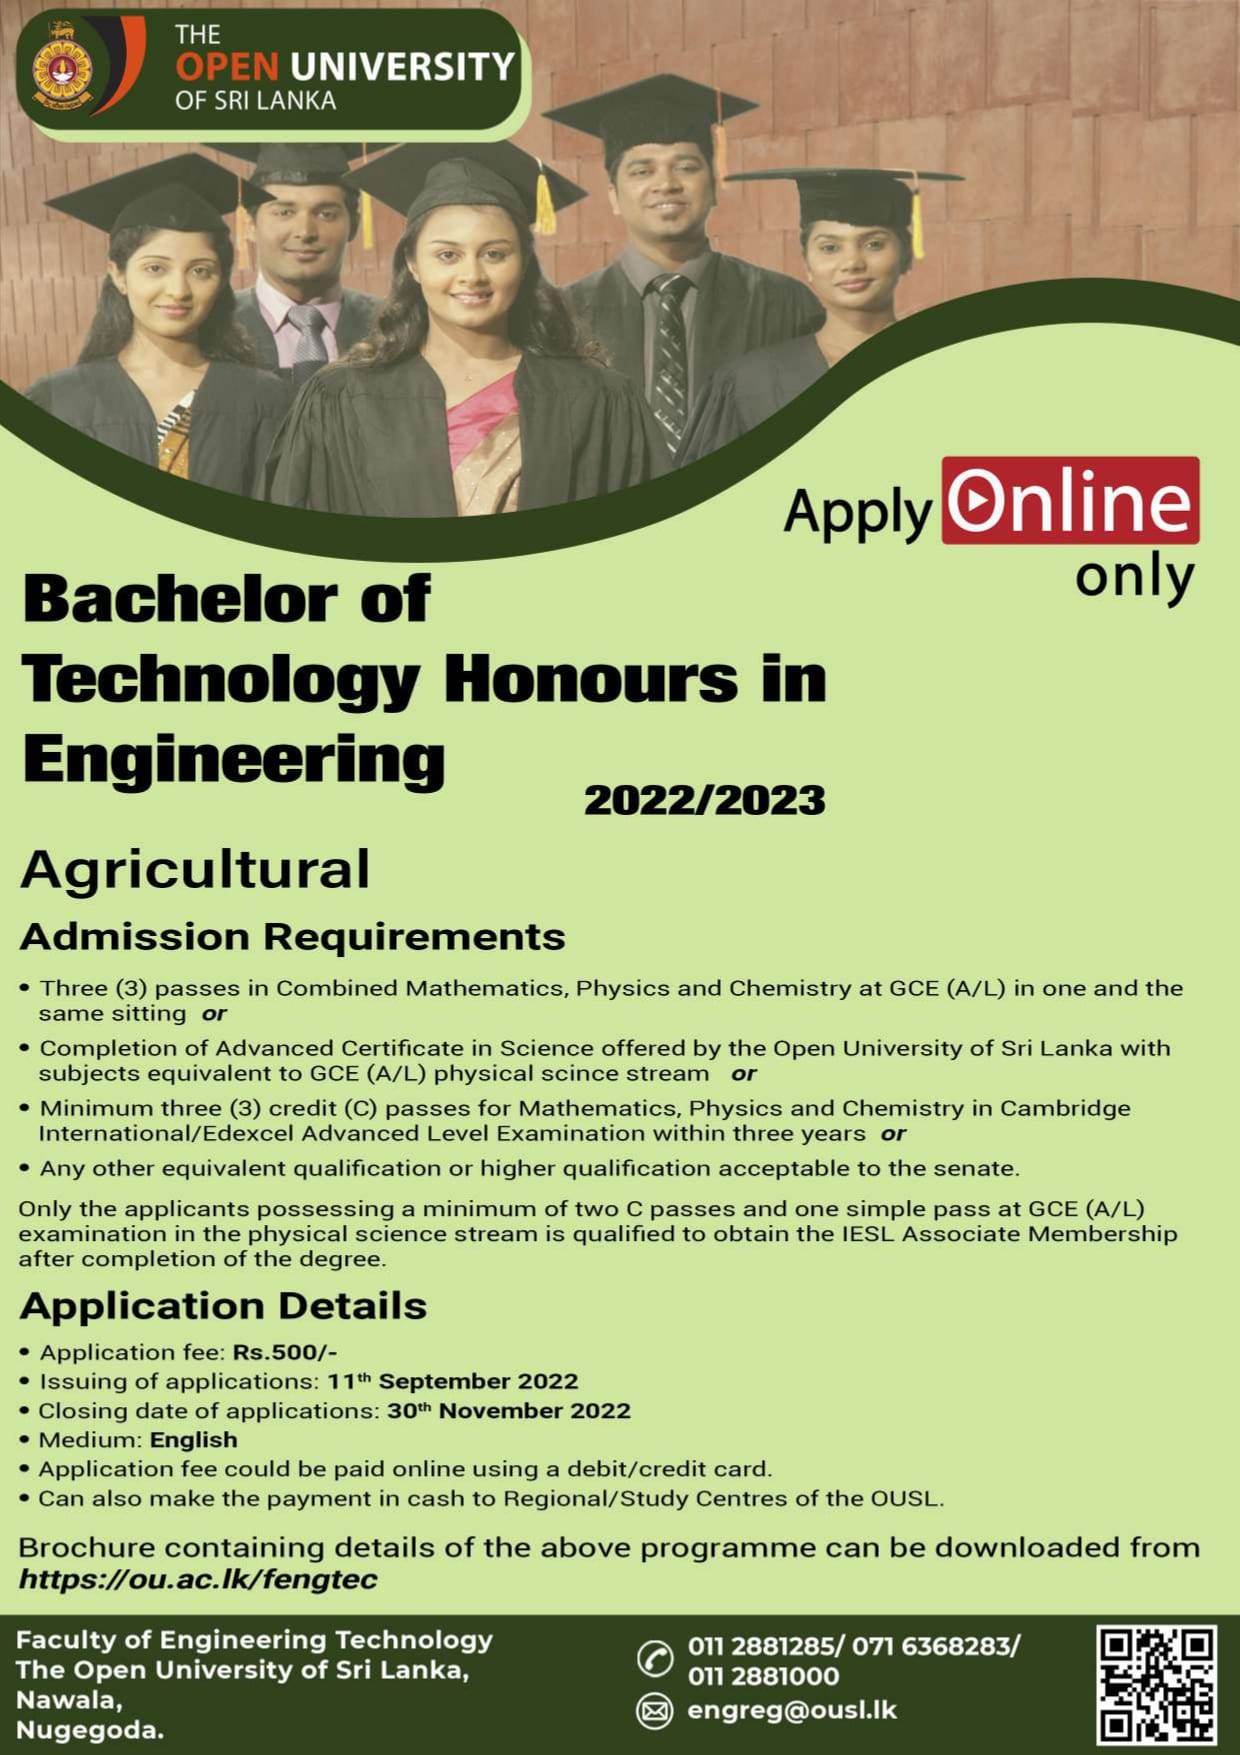 Bachelor of Technology (BTech) Honours in Agriculture and Plantation Engineering